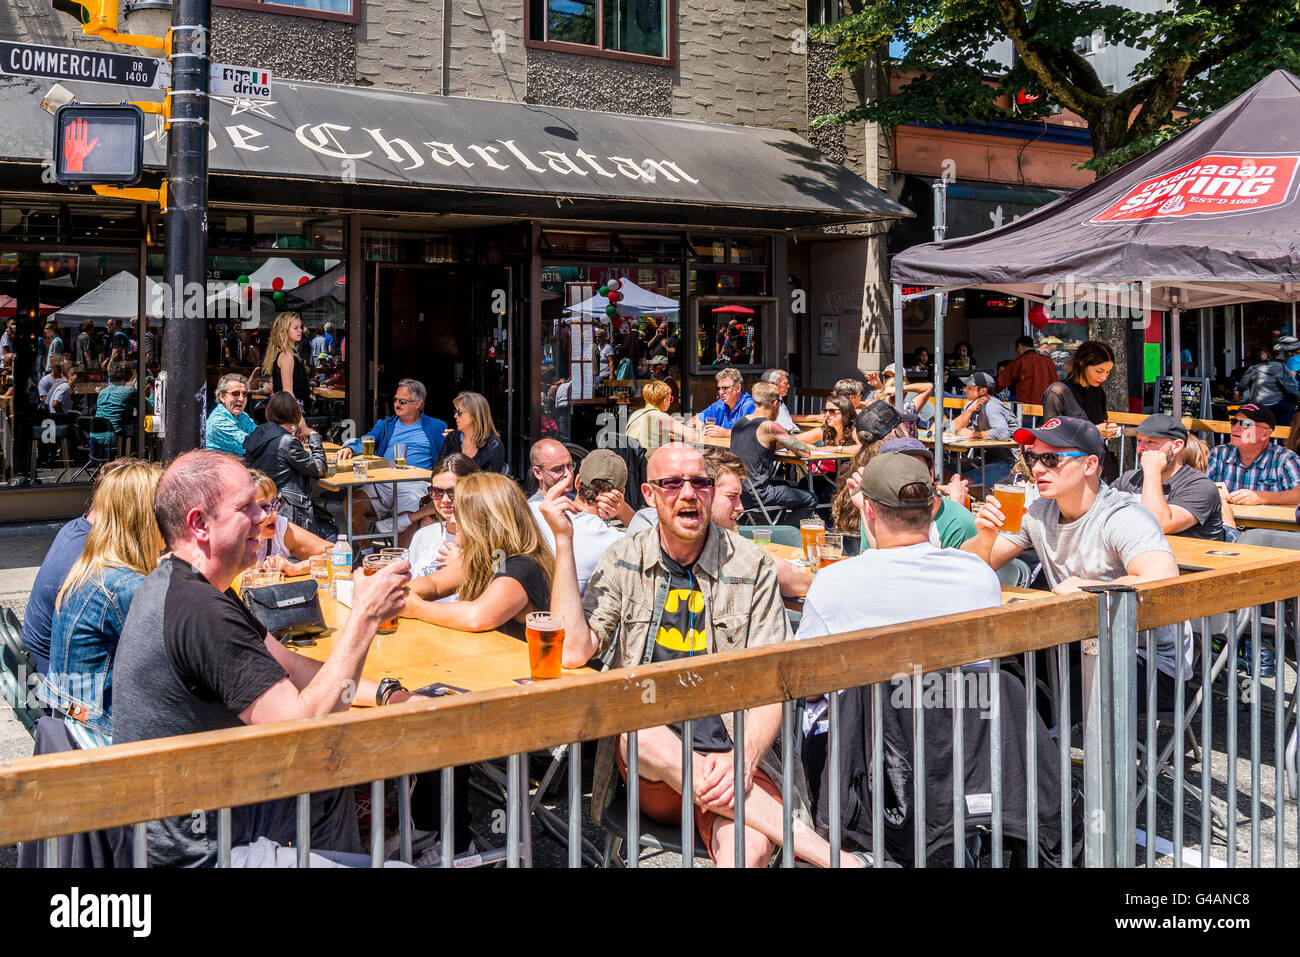 Busy restaurant patio, Commercial Drive, Vancouver, British Columbia, Canada Stock Photo